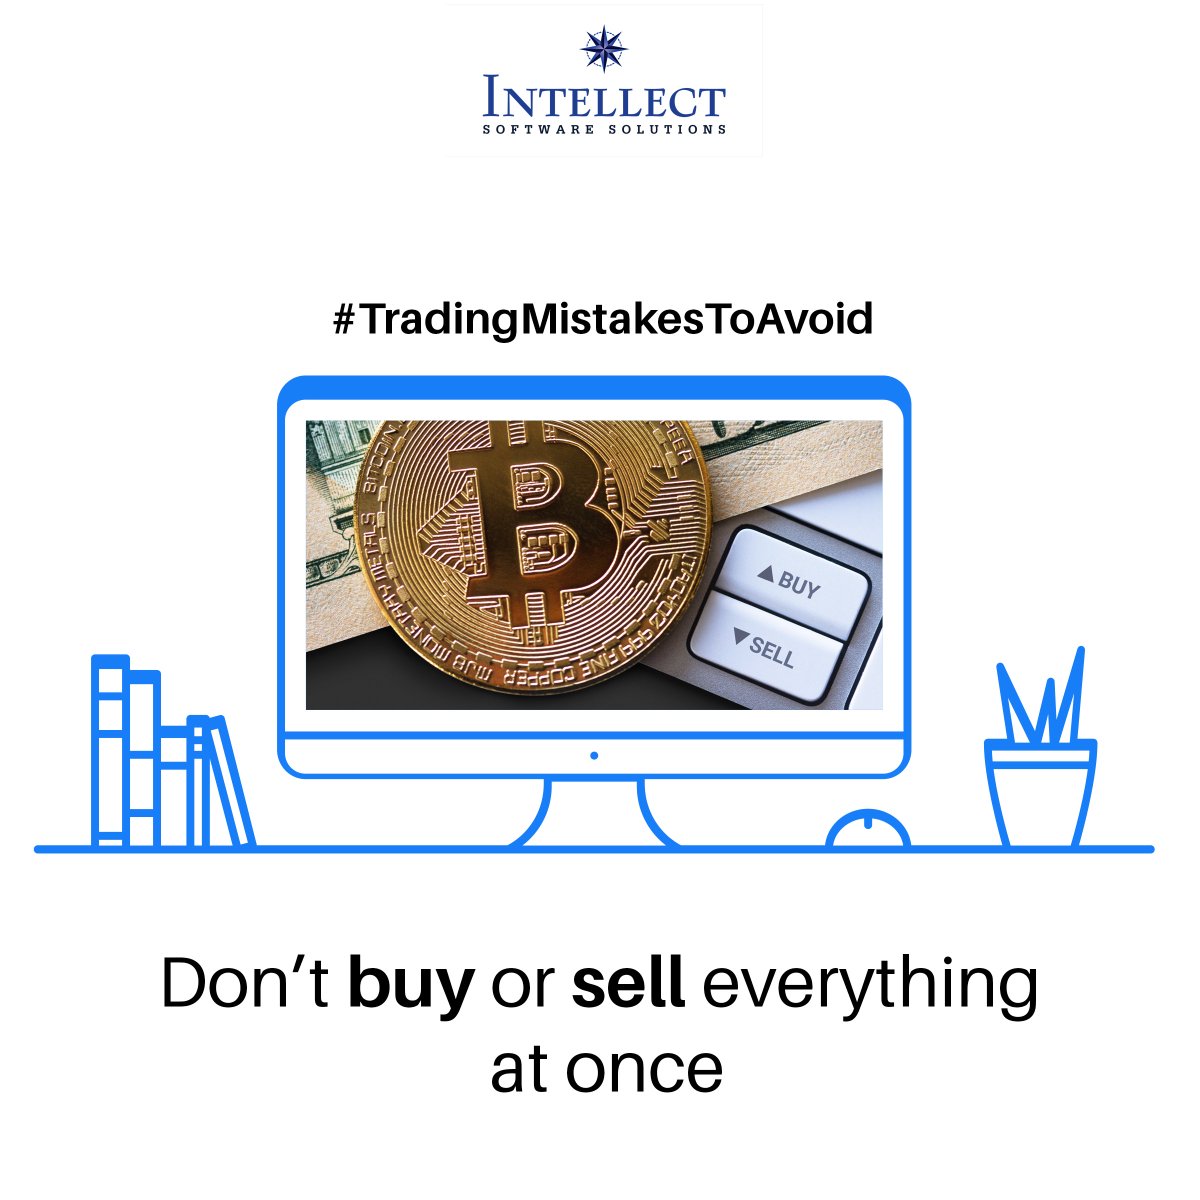 Don’t give in to #market hype and peer pressure affecting your #tradingdecisions. #Buying and #Selling of #shares should always be in installments.
#TradingMistakesToAvoid #Investors #StockMarket